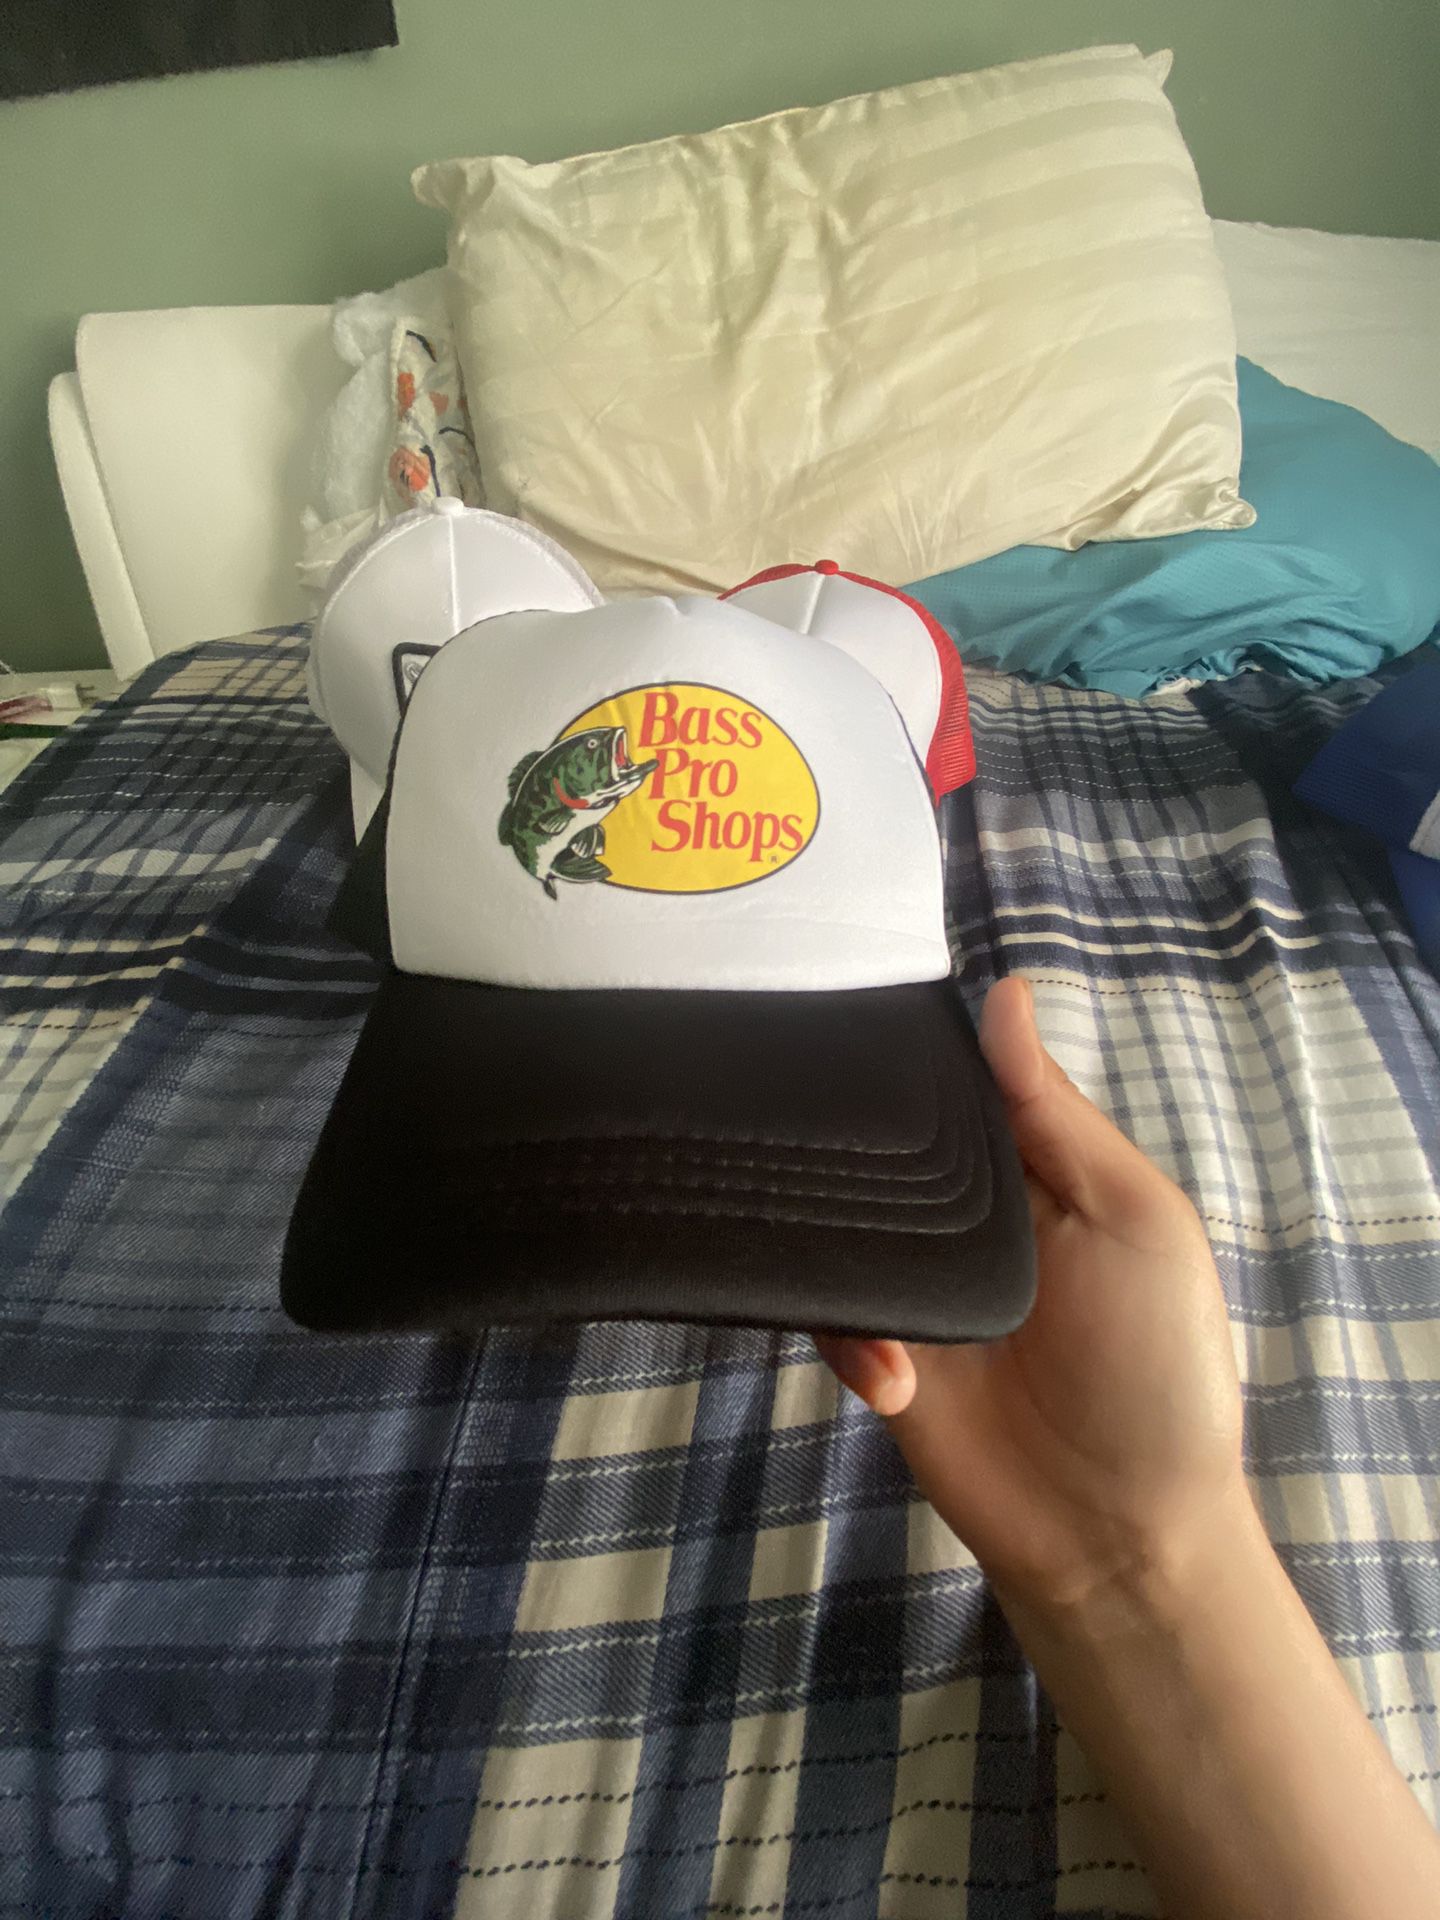 Bass Pro Shop Trucker Hat for Sale in Greensboro, NC - OfferUp